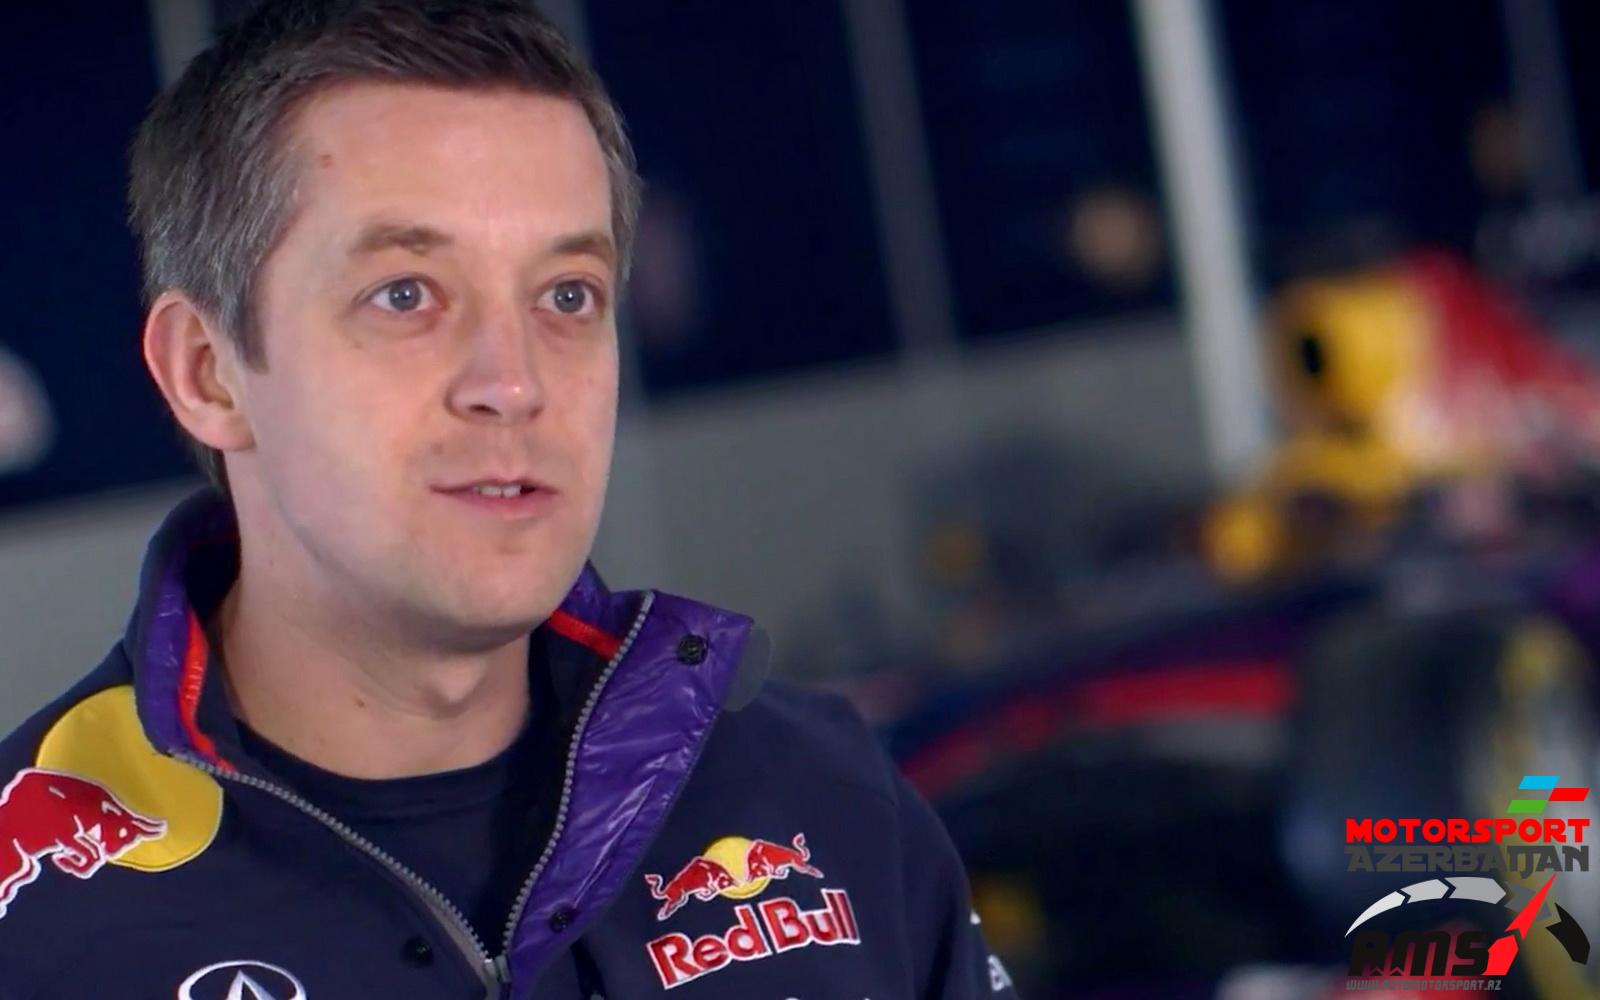 William Courtenay, Head of Race Strategy for Red Bull Racing